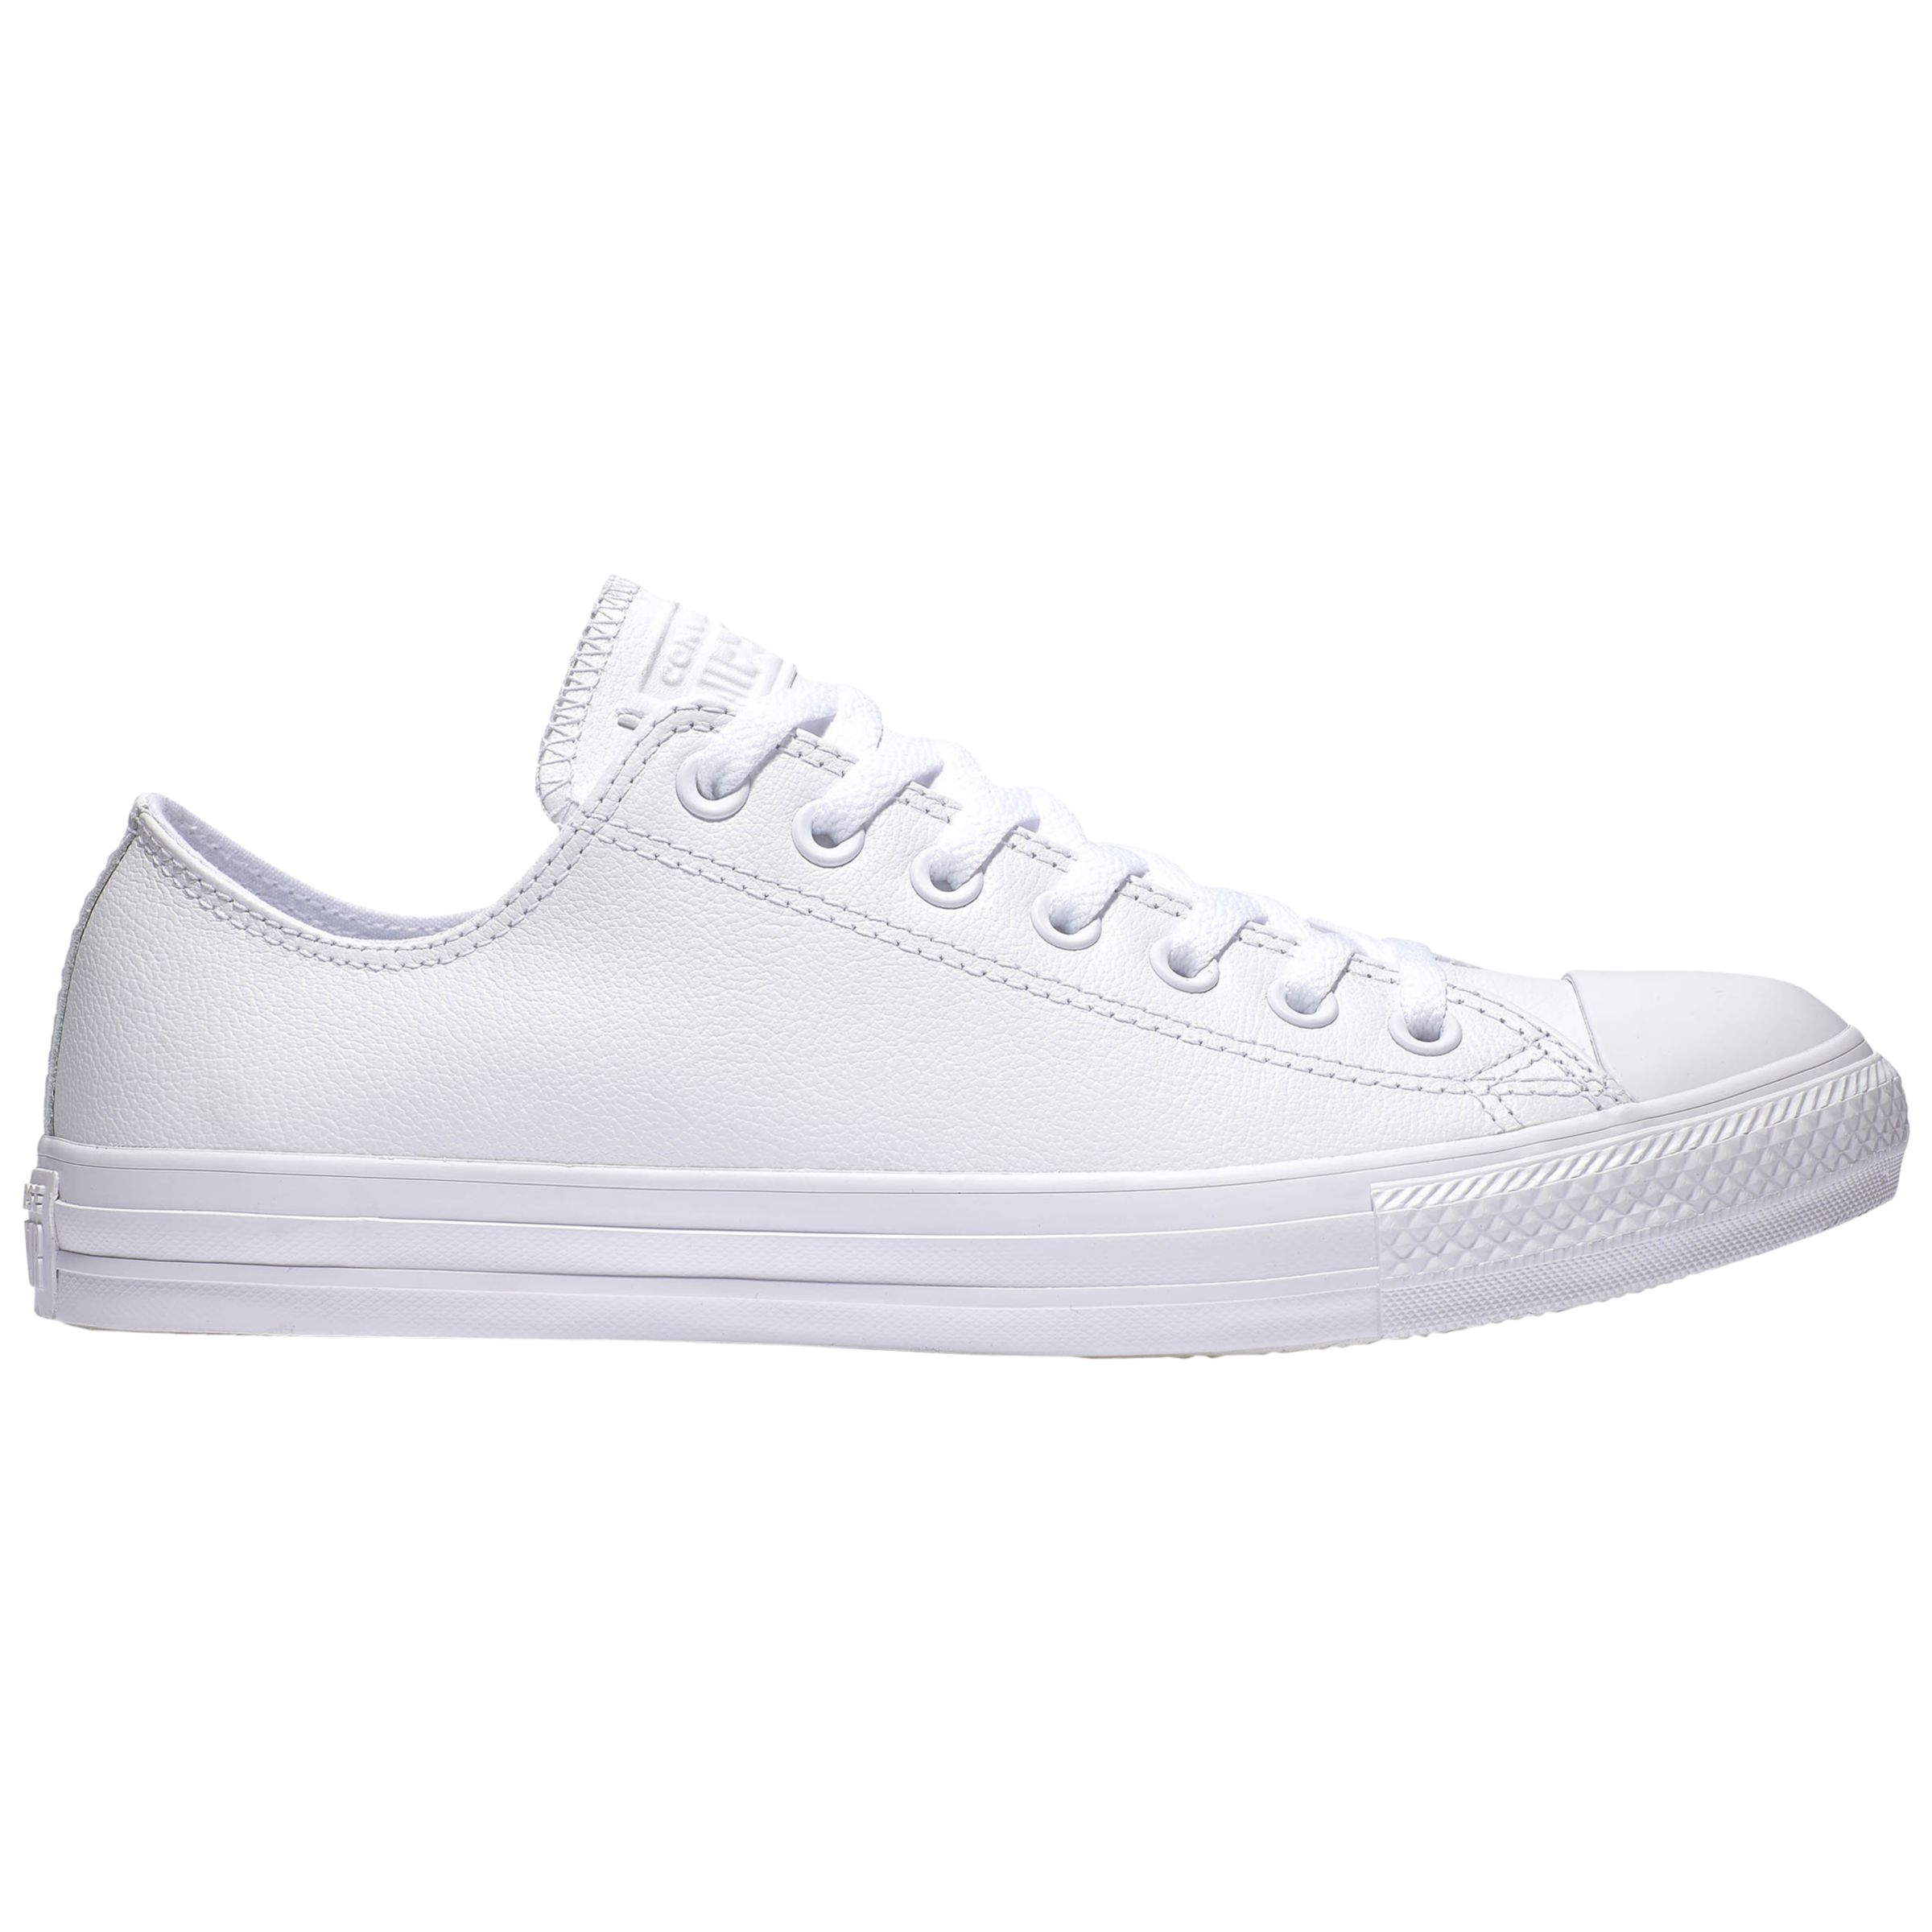 Converse All Star Leather Trainers, White at John Lewis & Partners